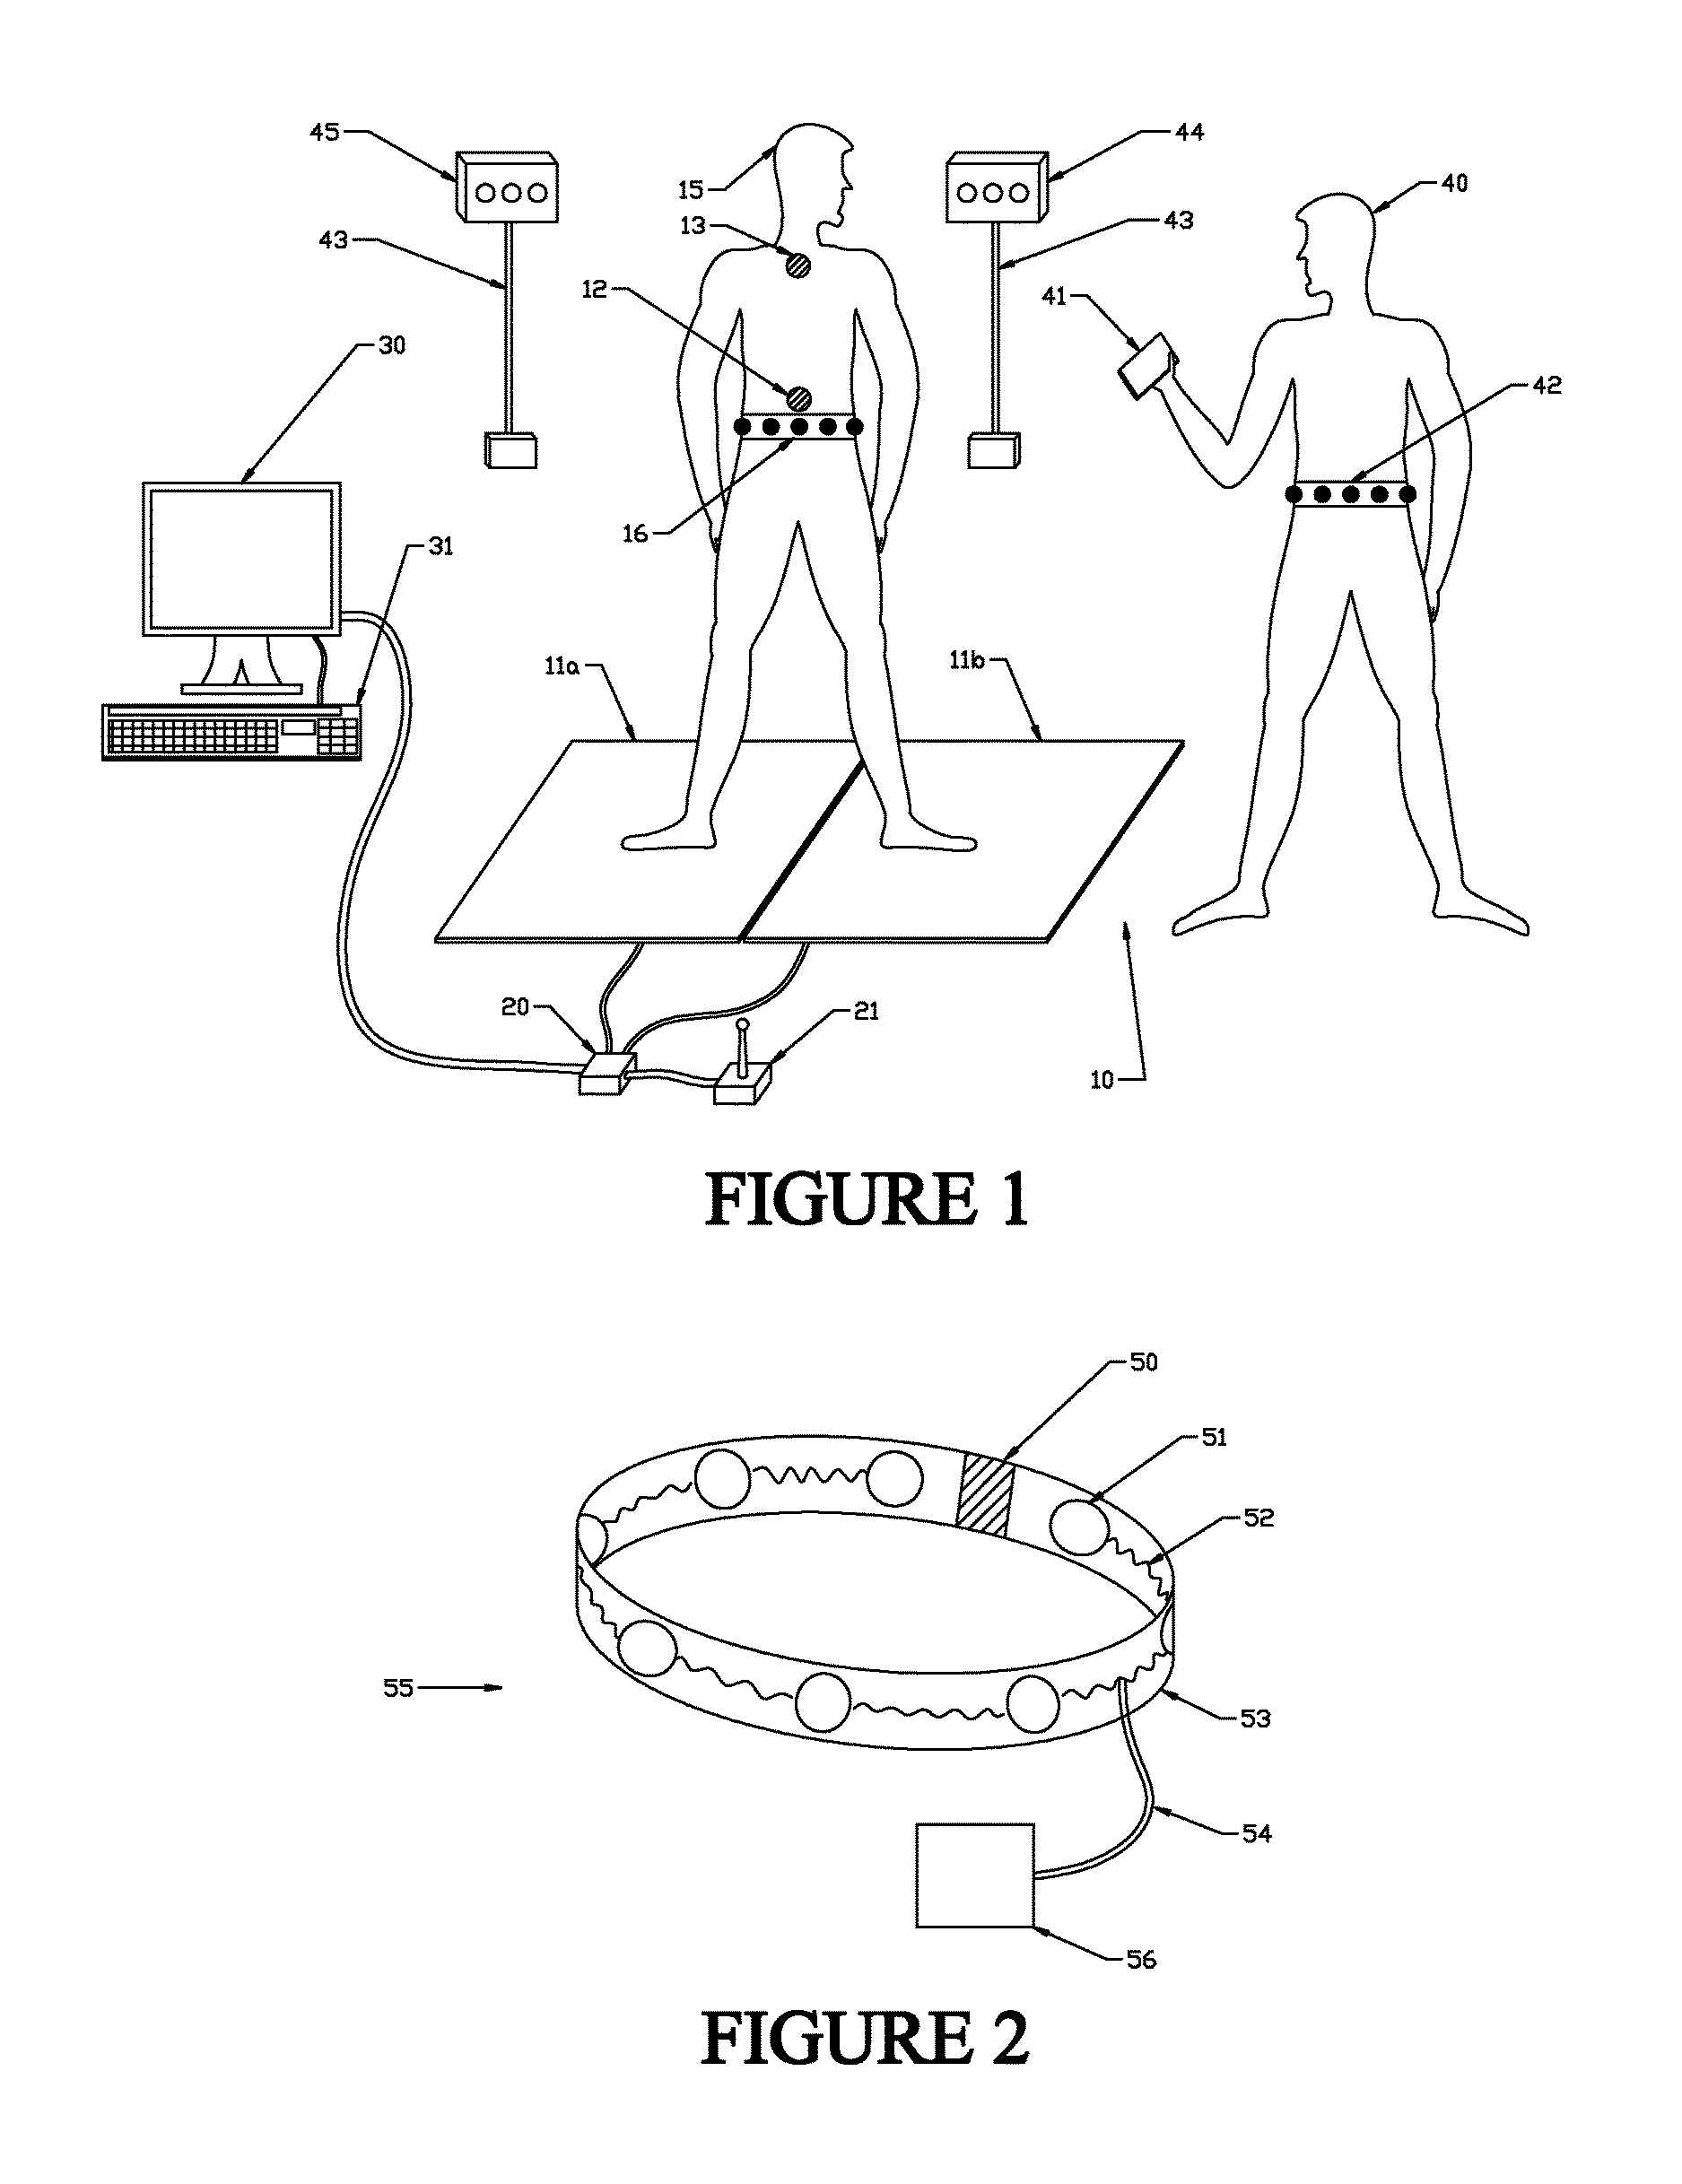 Enhanced system and method for vibrotactile guided therapy